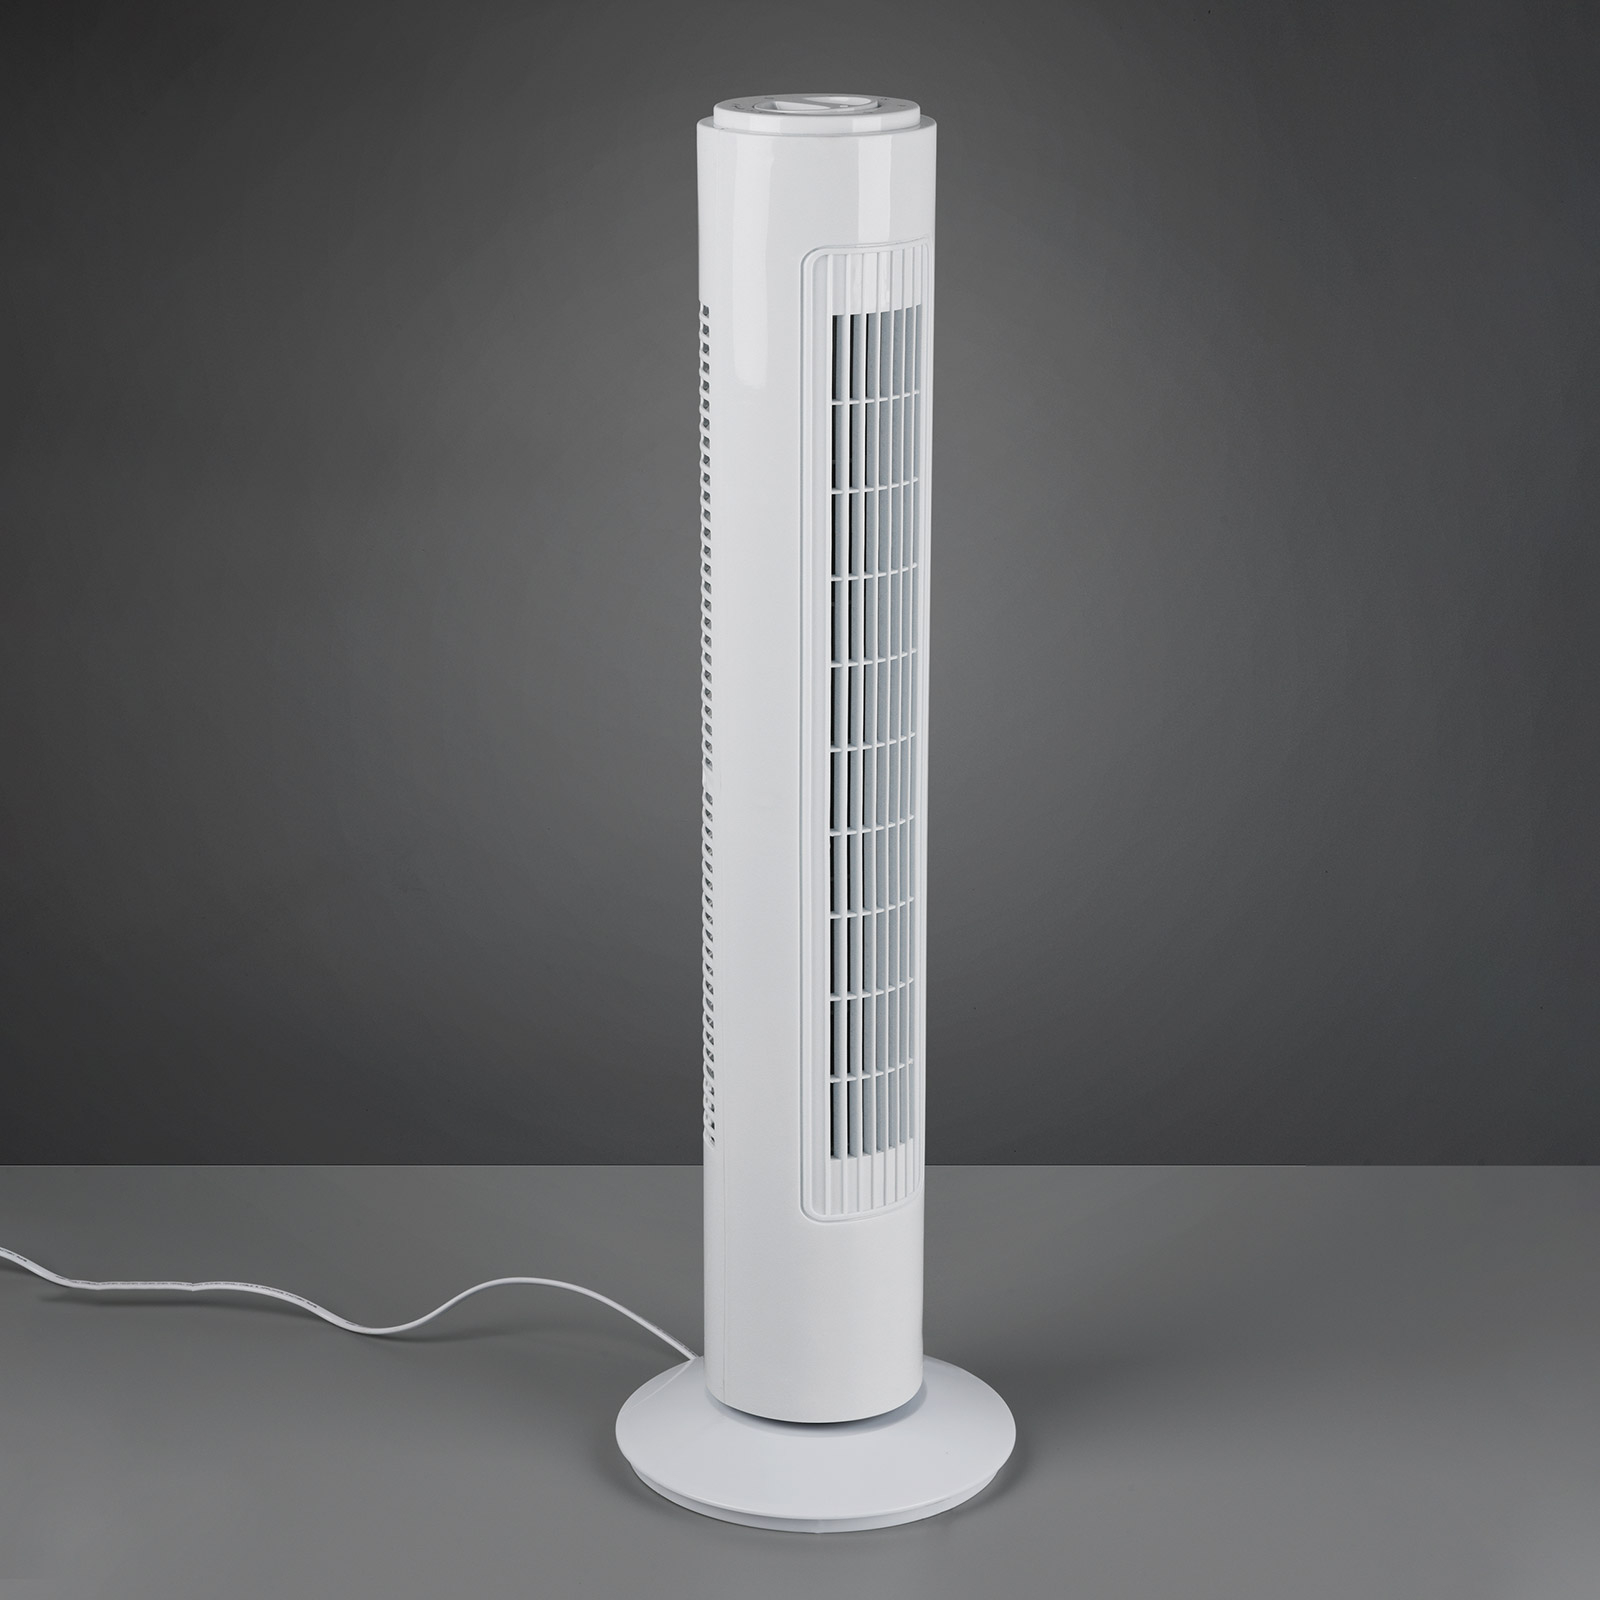 Malmö pedestal fan with a practical switch